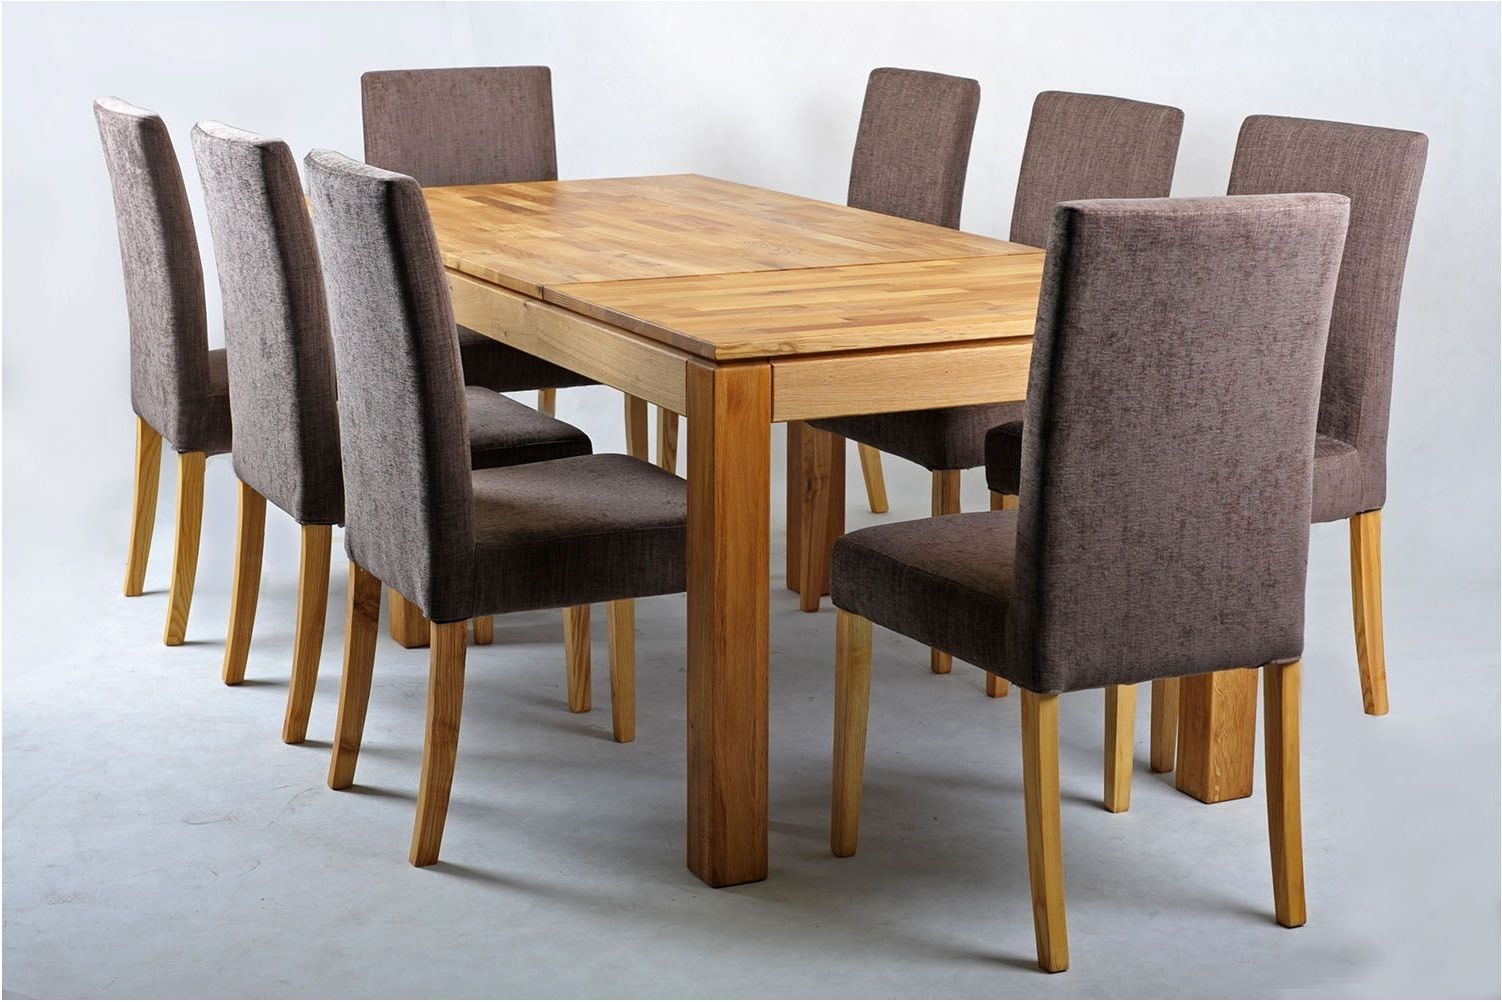 Oak Extendable Dining Tables And Chairs With Regard To Popular Spectacular Solid Oak Extending Dining Table And Chairs Set Home (View 1 of 25)